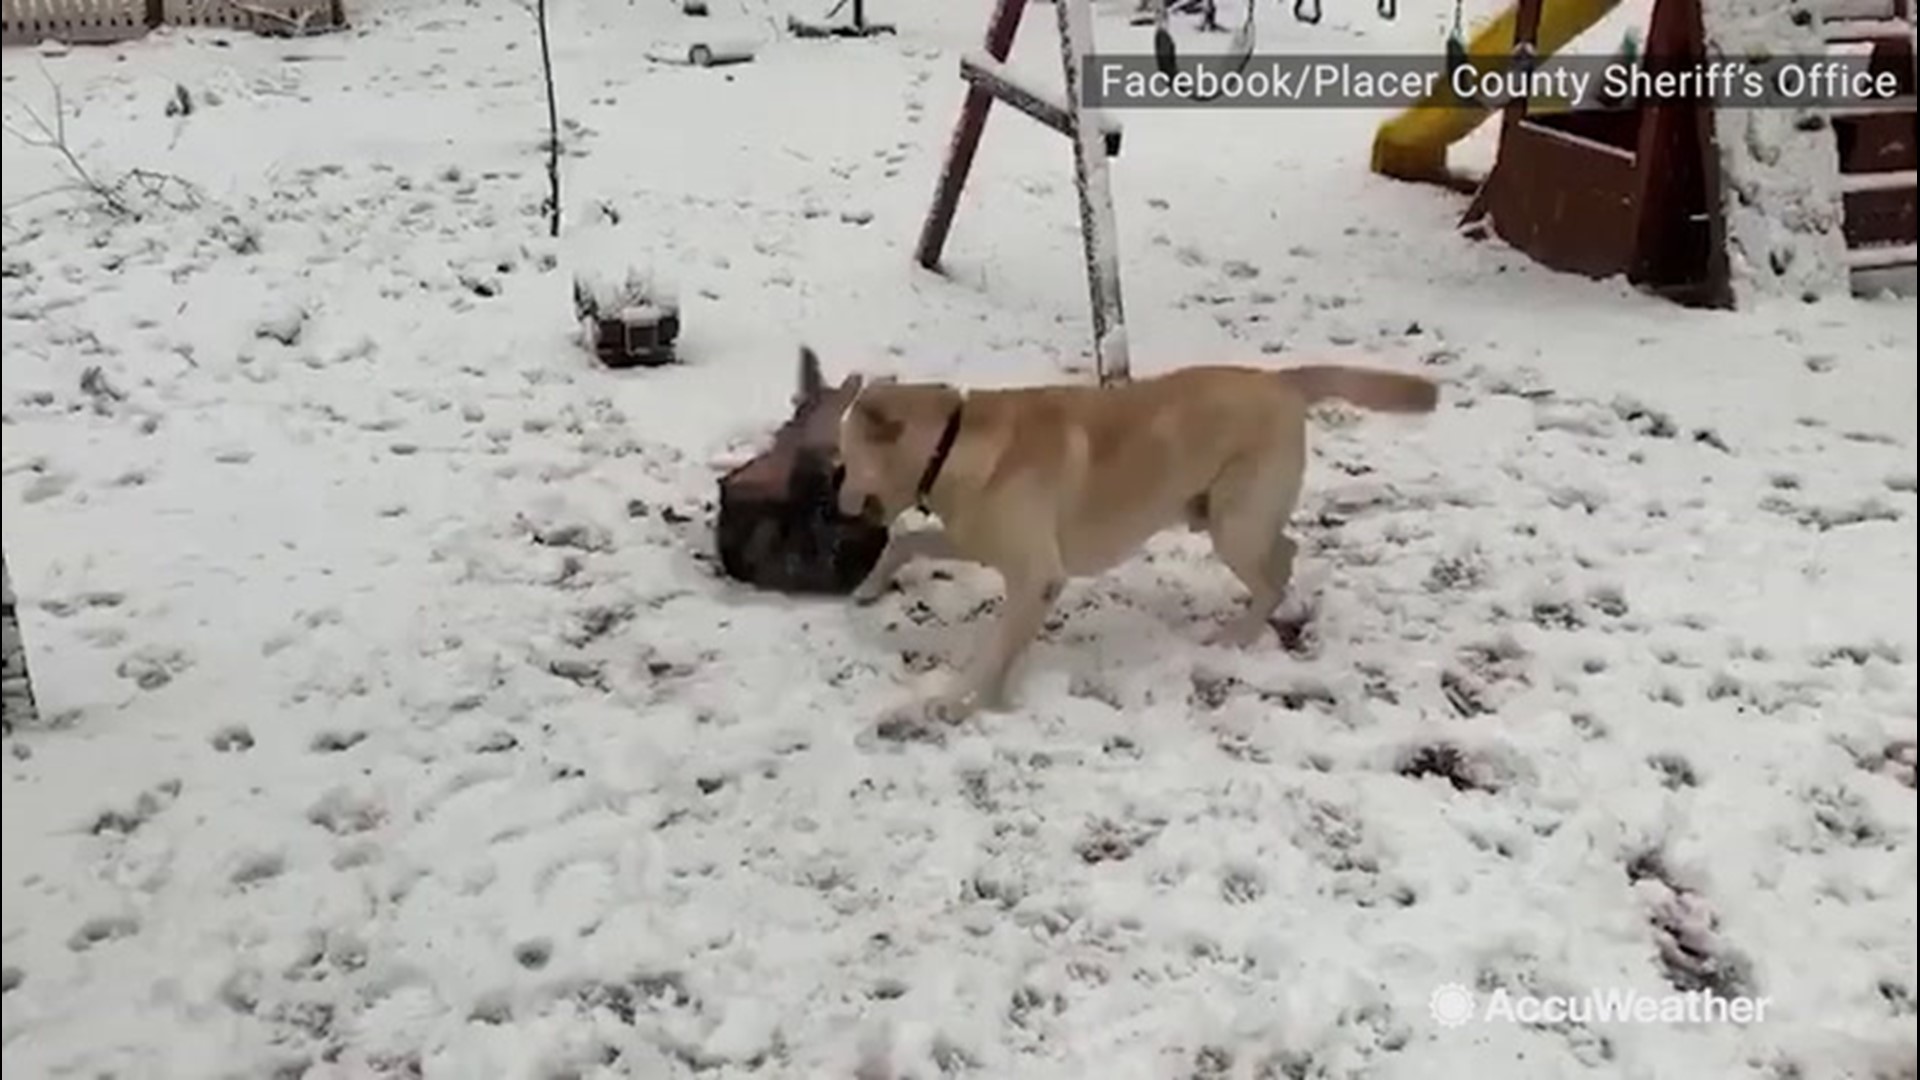 A police dog and his brother were recorded rolling around in their backyard after snow fell in Place County, California on Jan. 19.